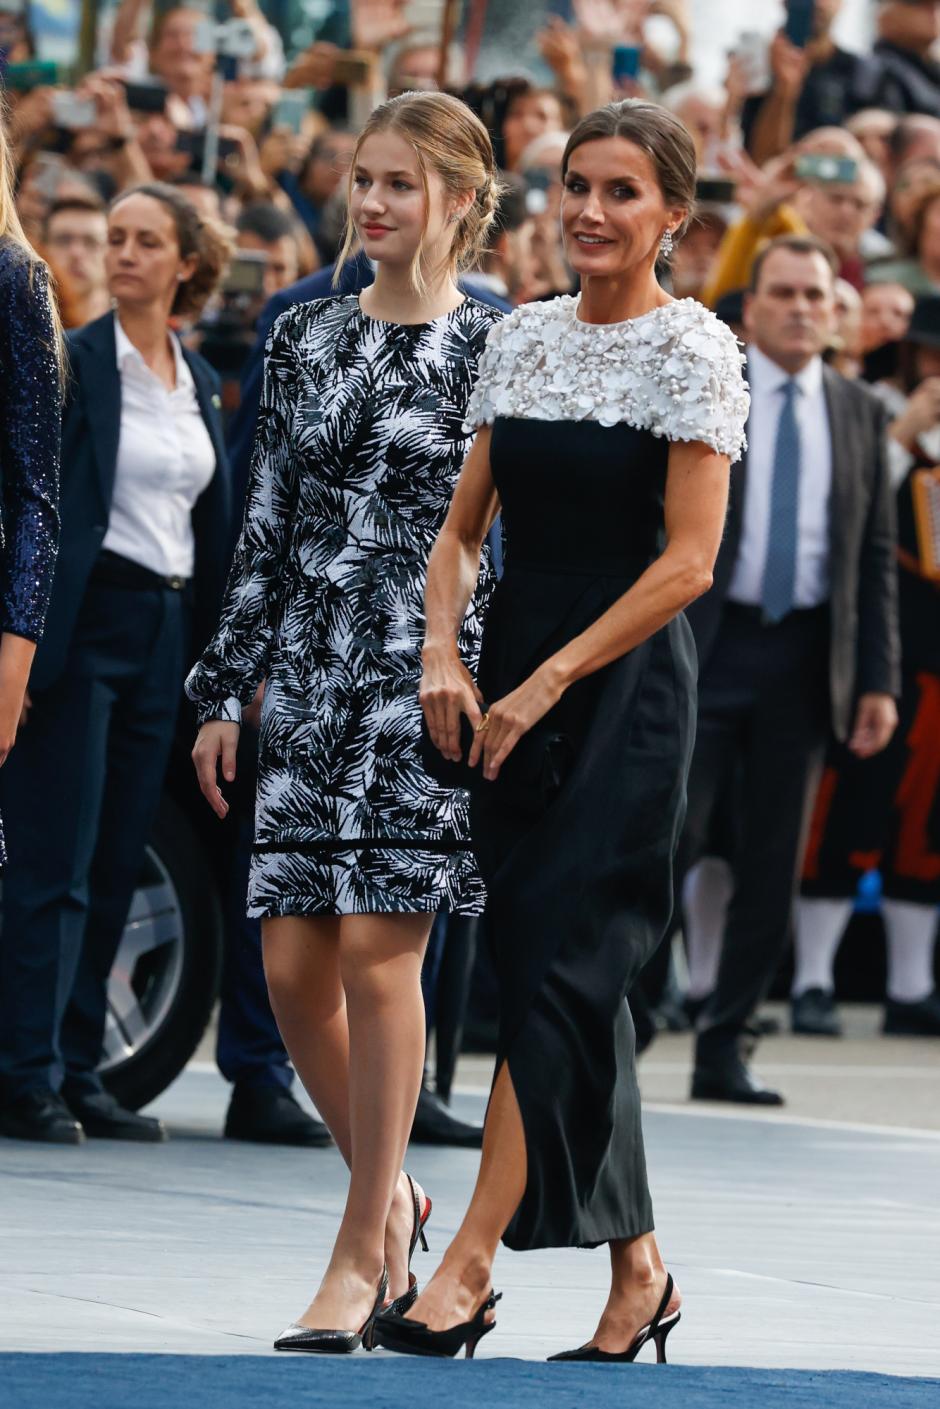 Spanish Queen Letizia and Princess Leonor during the Princess of Asturias Awards 2022 in Oviedo, on Friday 29 October 2022.